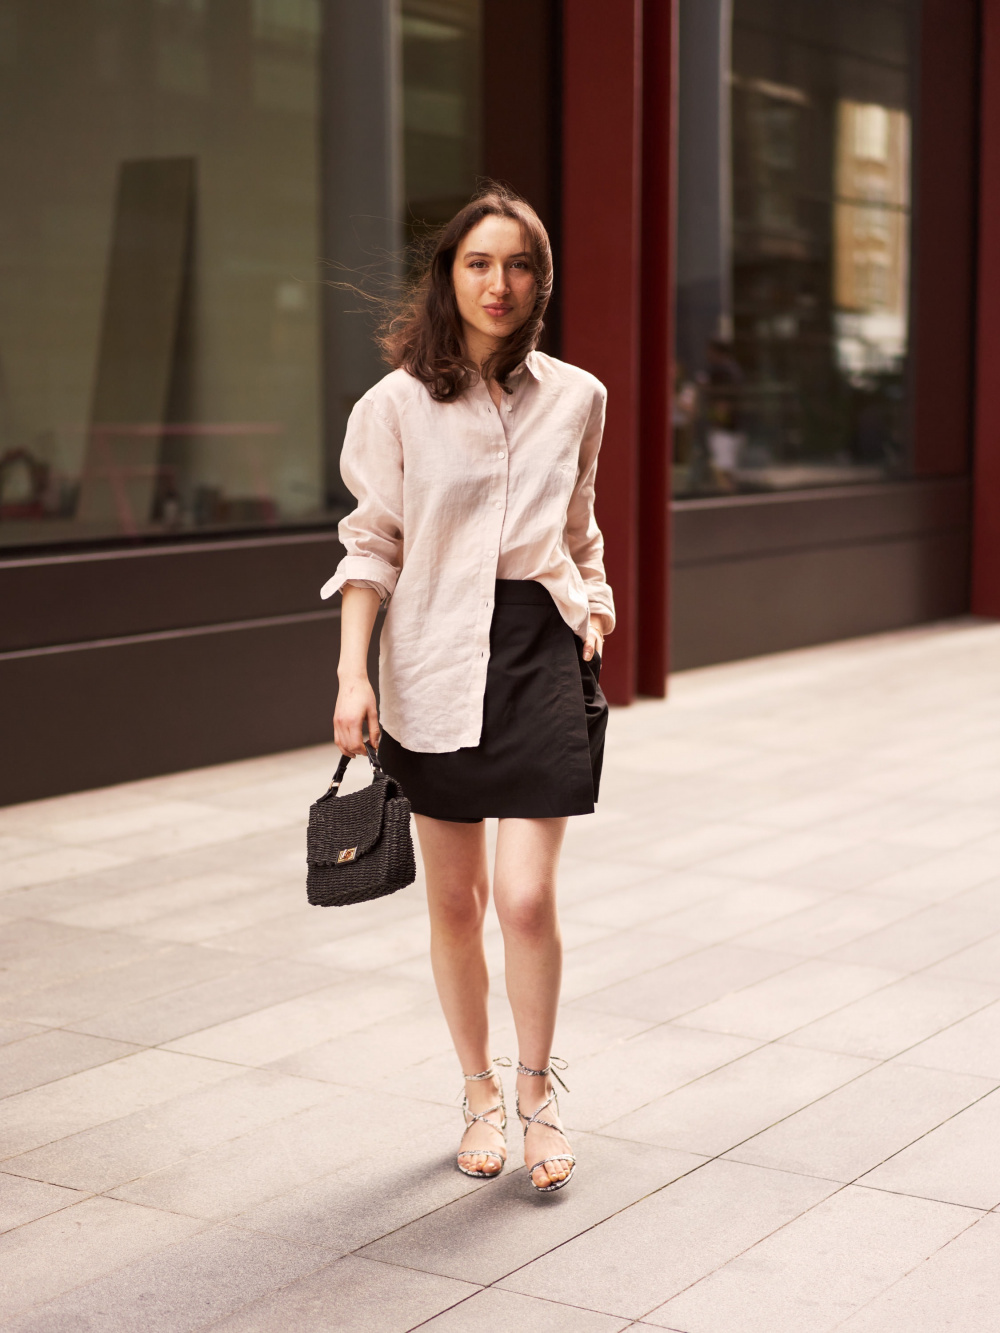 Check styling ideas for「Premium Linen Long-Sleeve Shirt、Pleated A-Line Mini  Skirt」